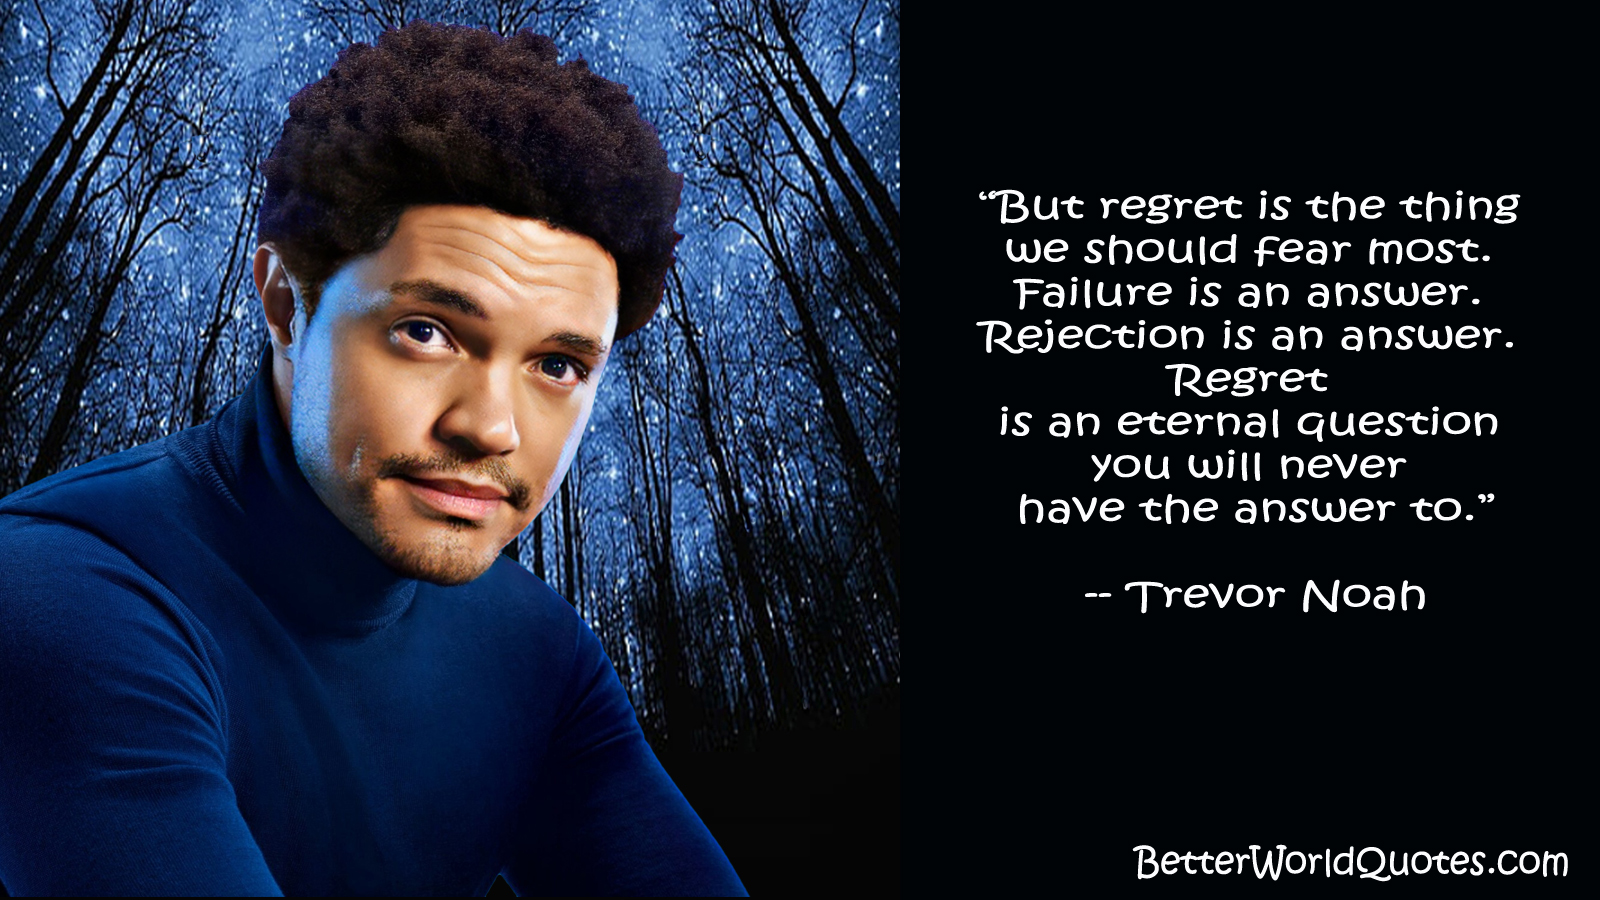 Trevor Noah: But regret is the thing we should fear most. Failure is an answer. Rejection is an answer. Regret is an eternal question you will never have the answer to.